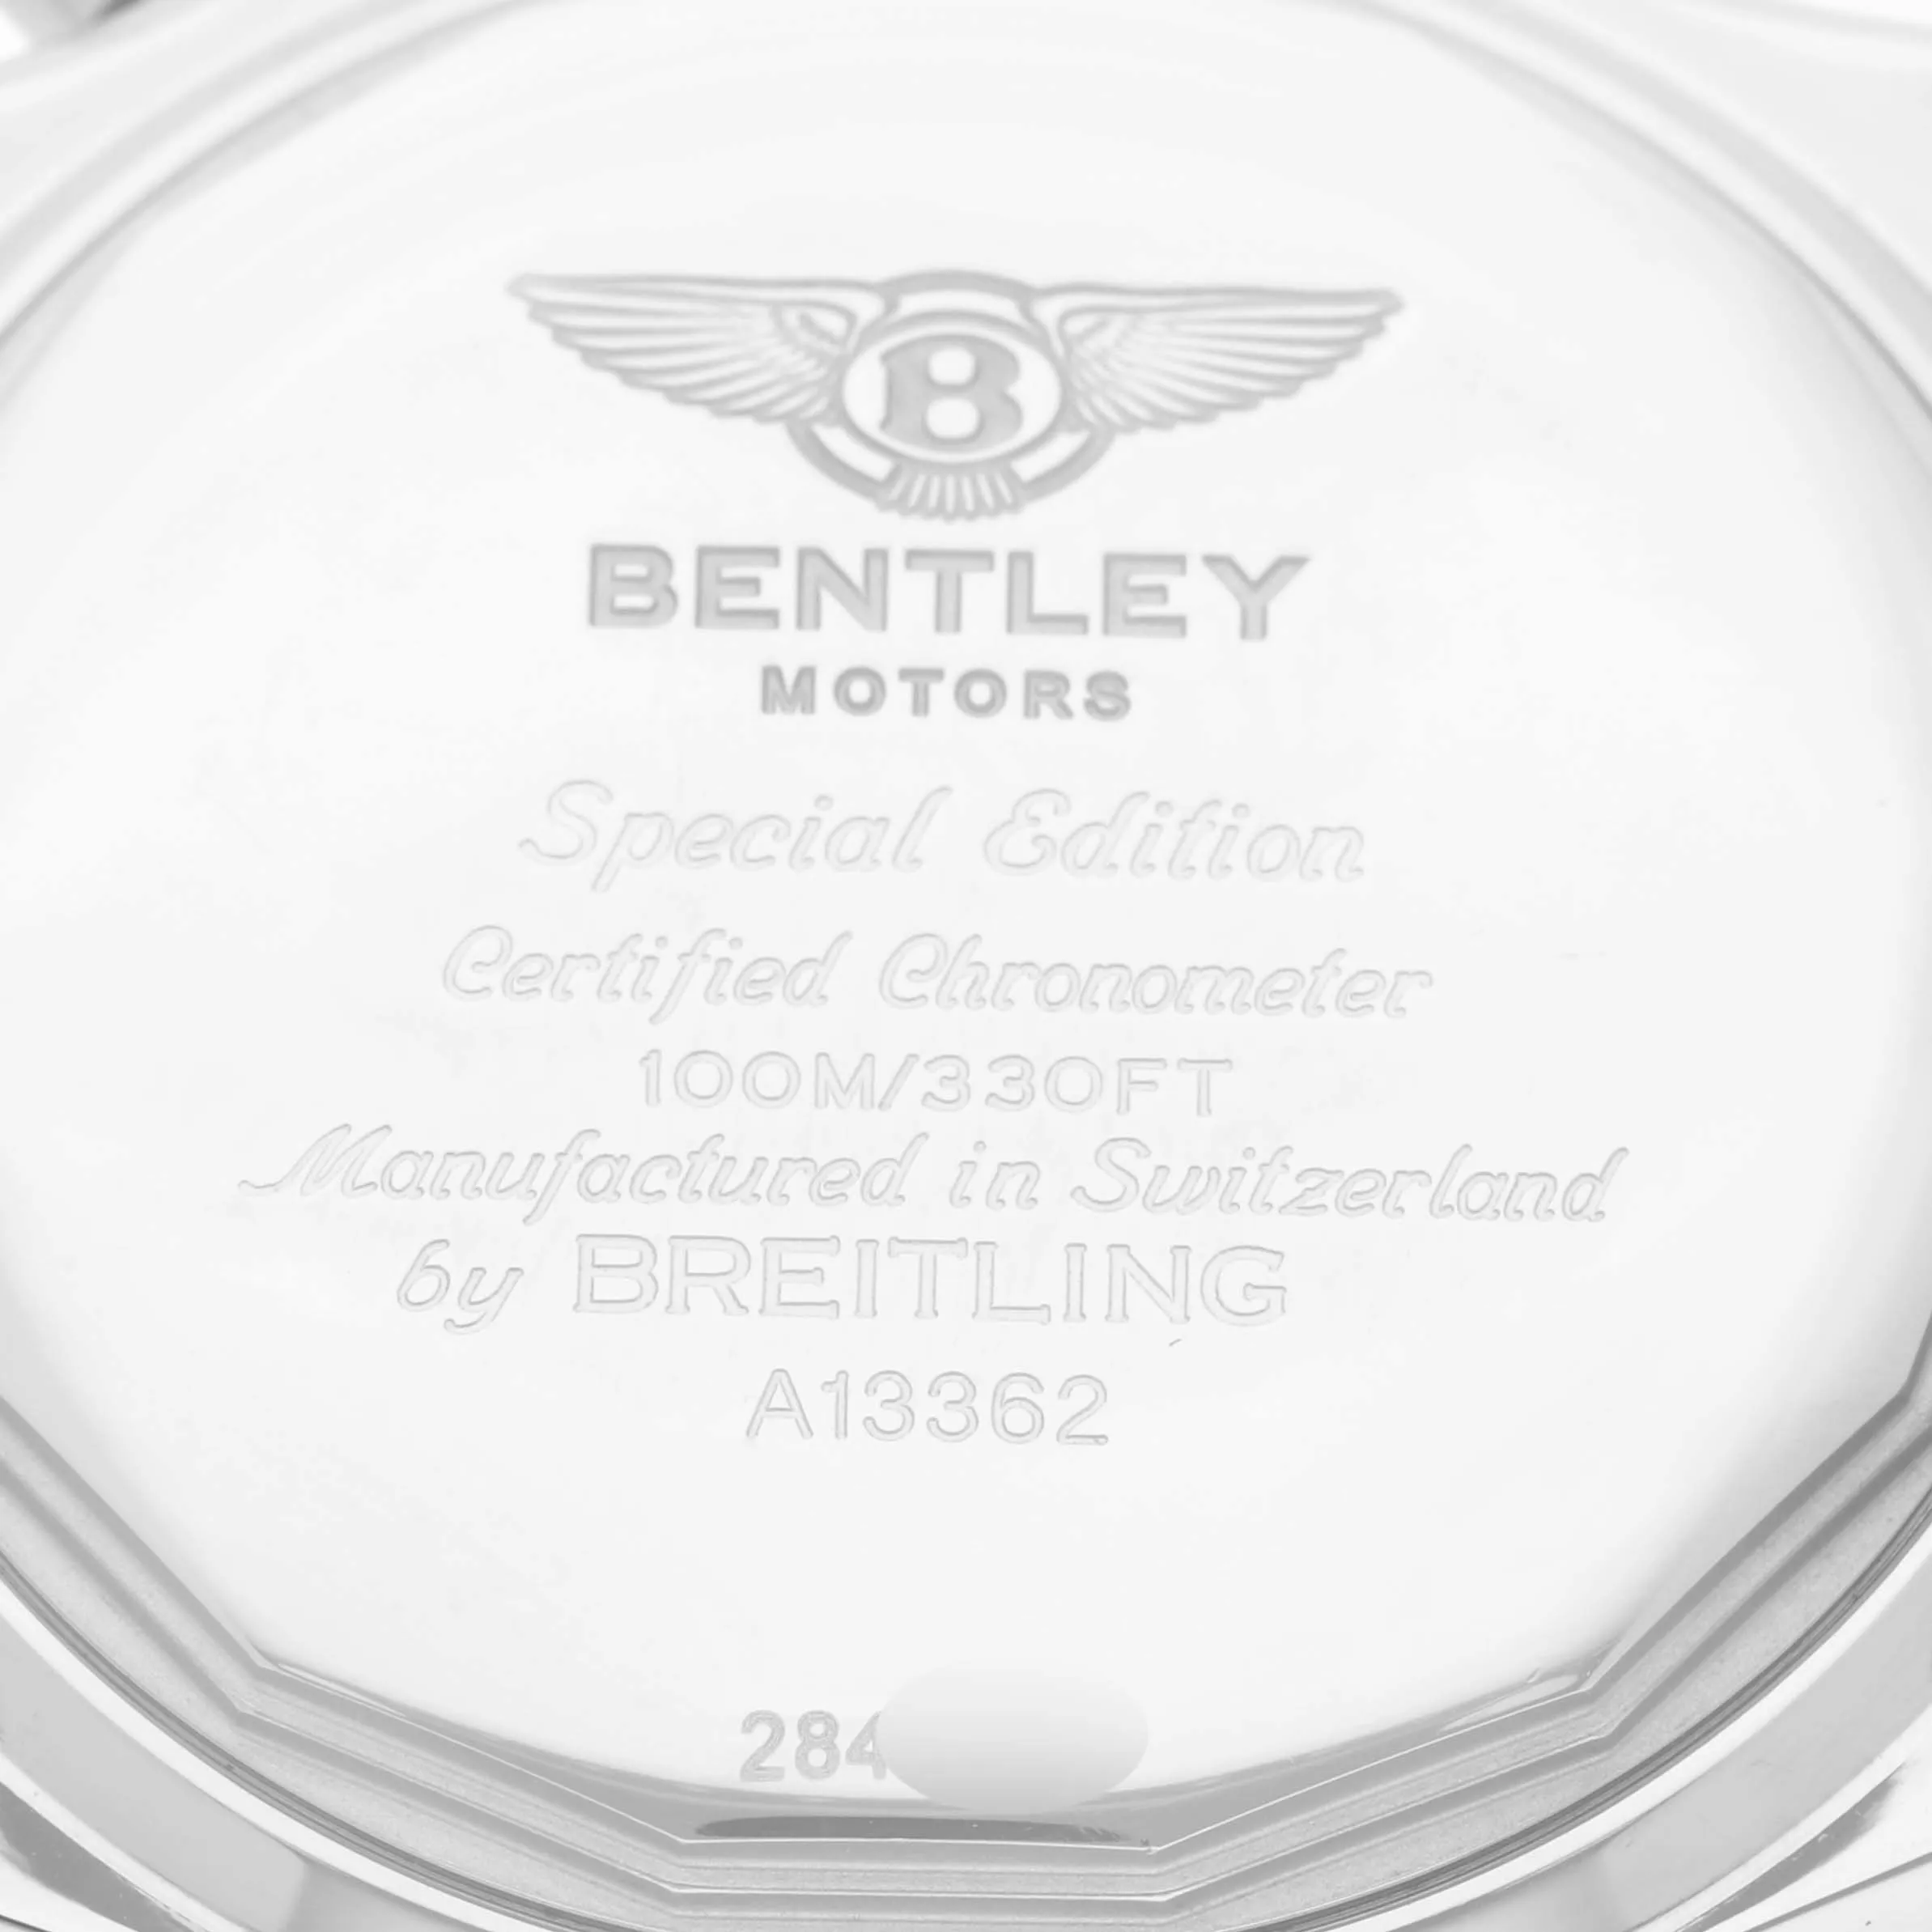 Breitling Bentley A13362 45mm Stainless steel Blue 7